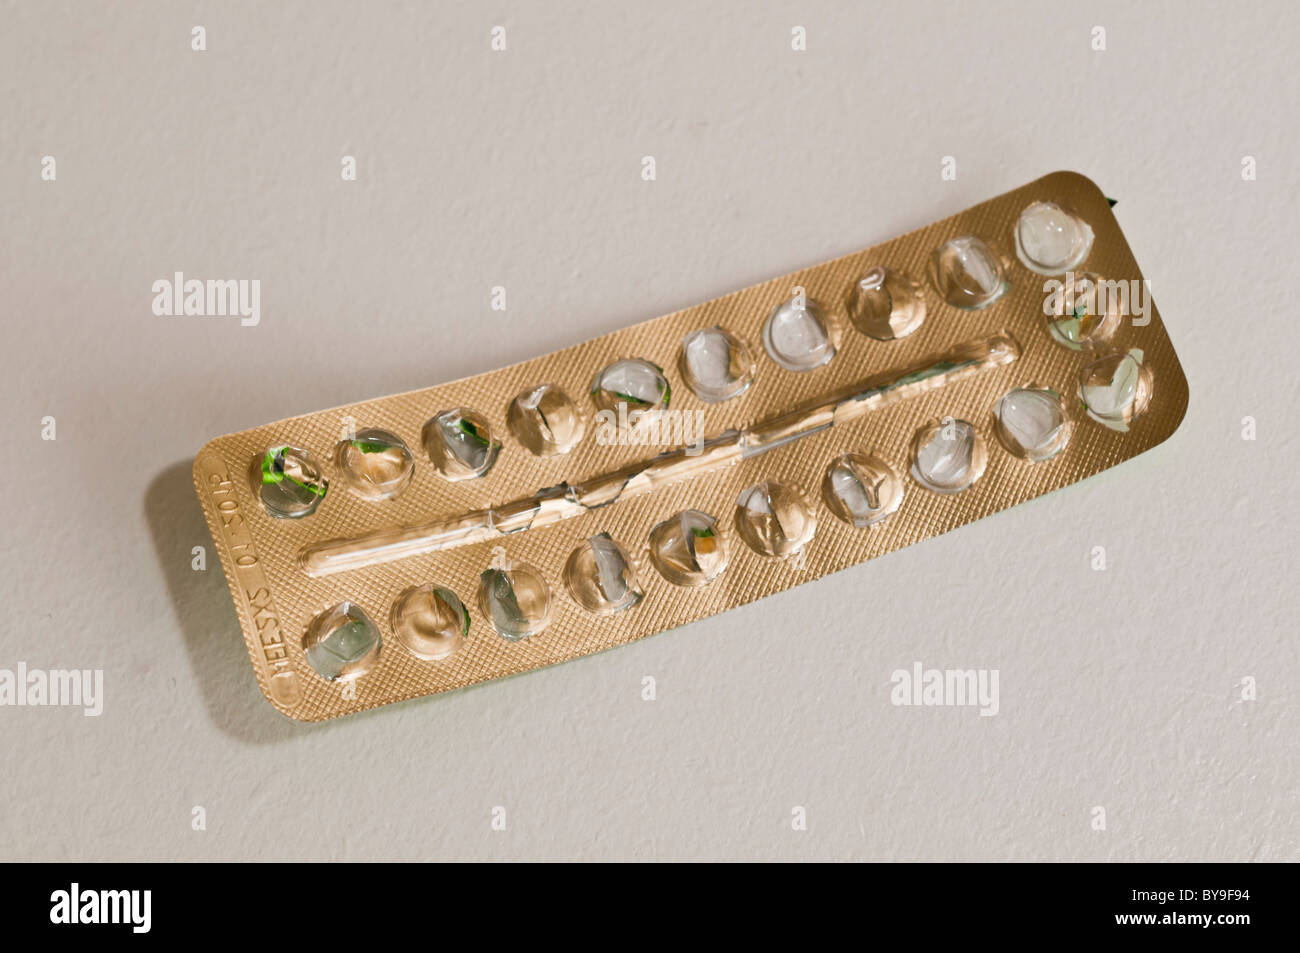 Blister pack of contraceptive pills Stock Photo